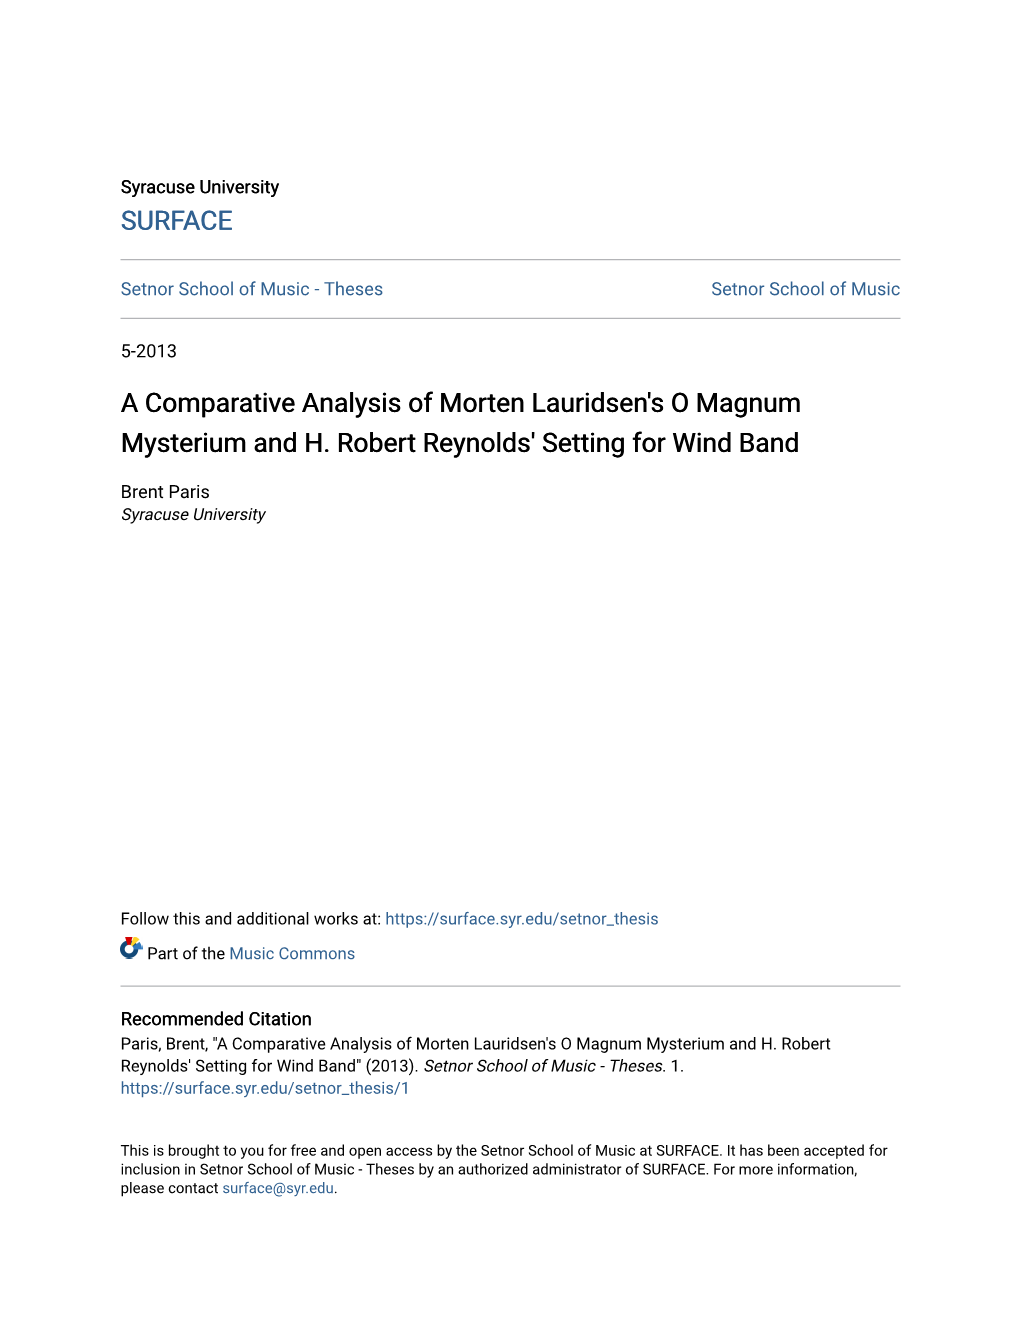 A Comparative Analysis of Morten Lauridsen's O Magnum Mysterium and H